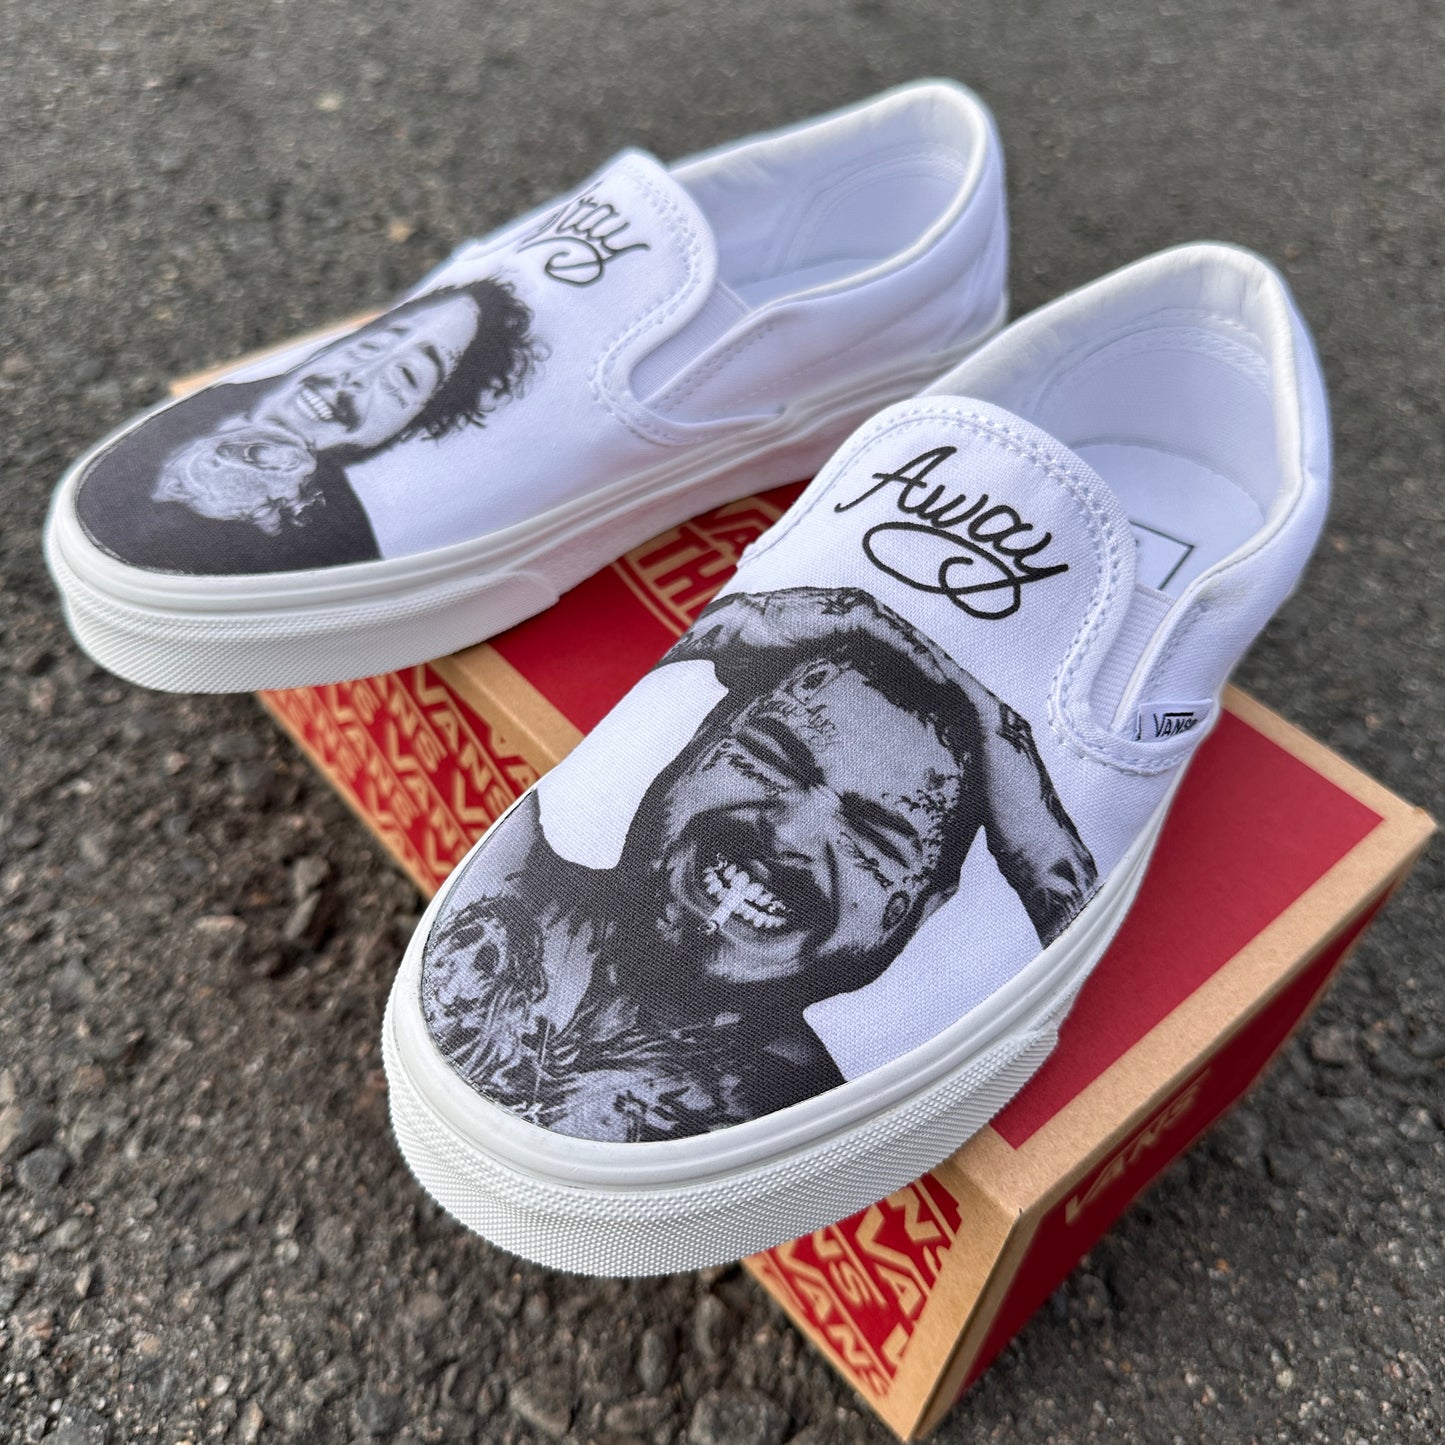 post malone shoes